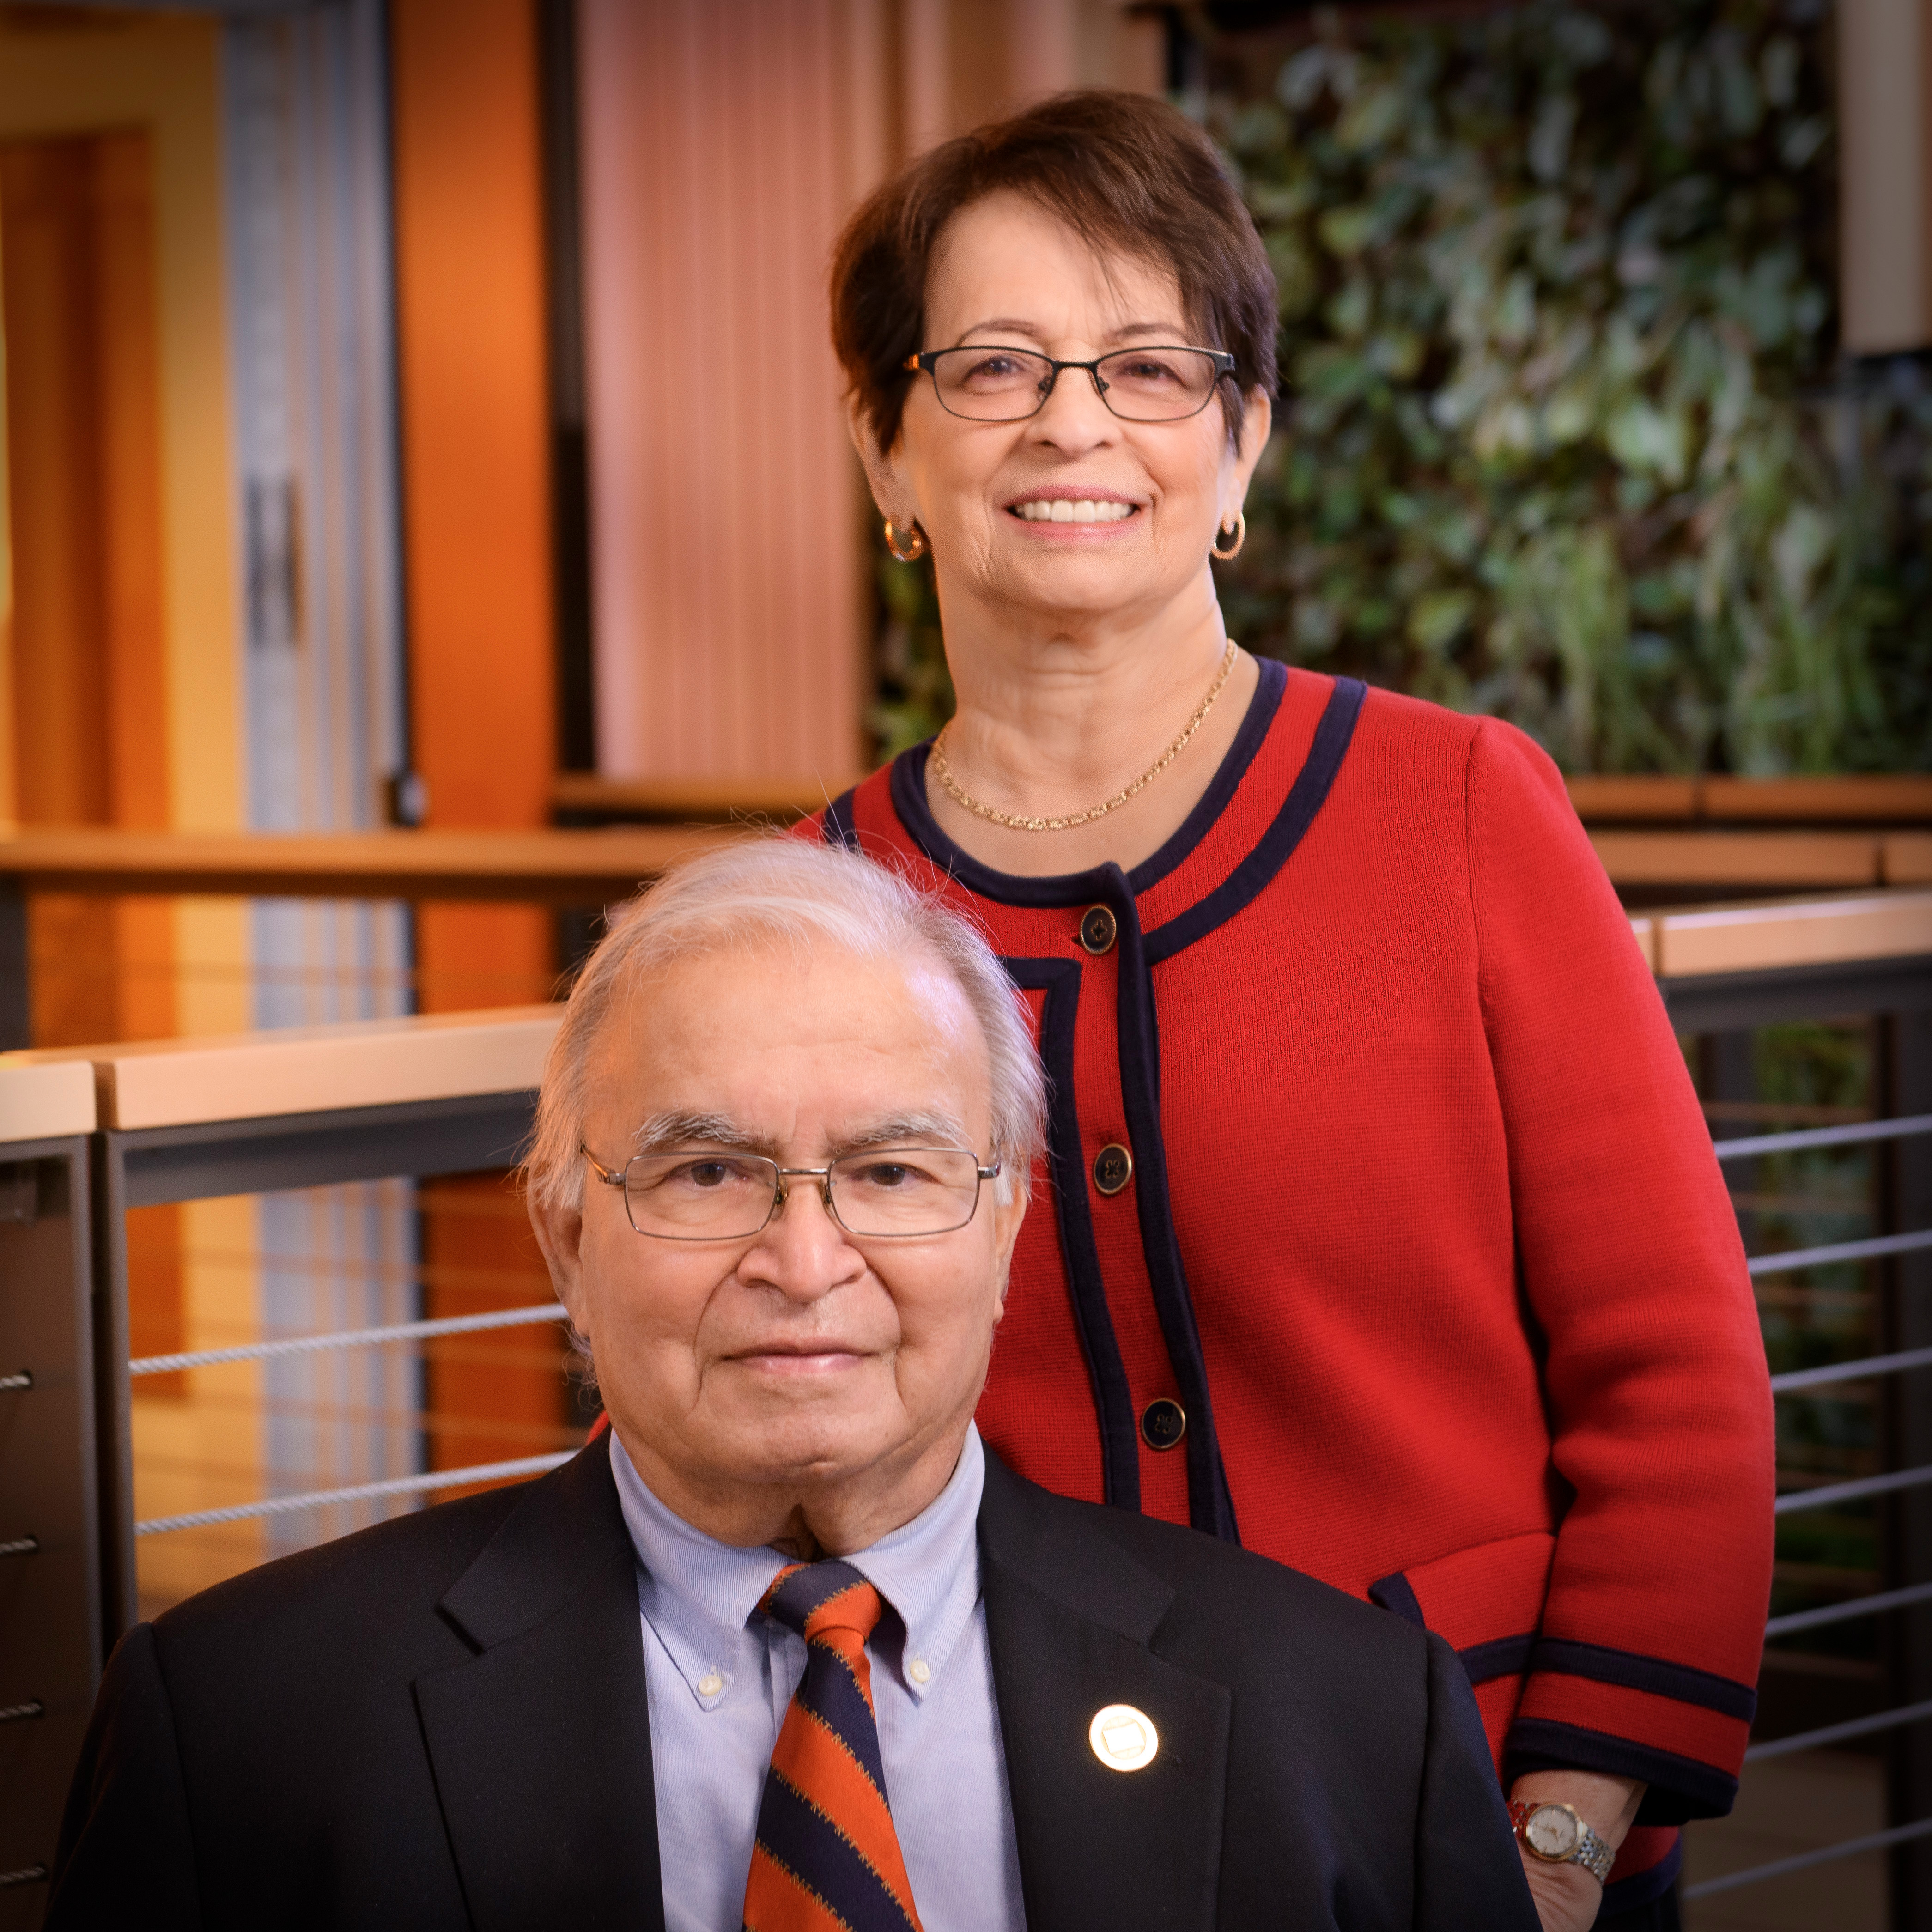 Bal and Anita Dixit honored as Outstanding Alumni